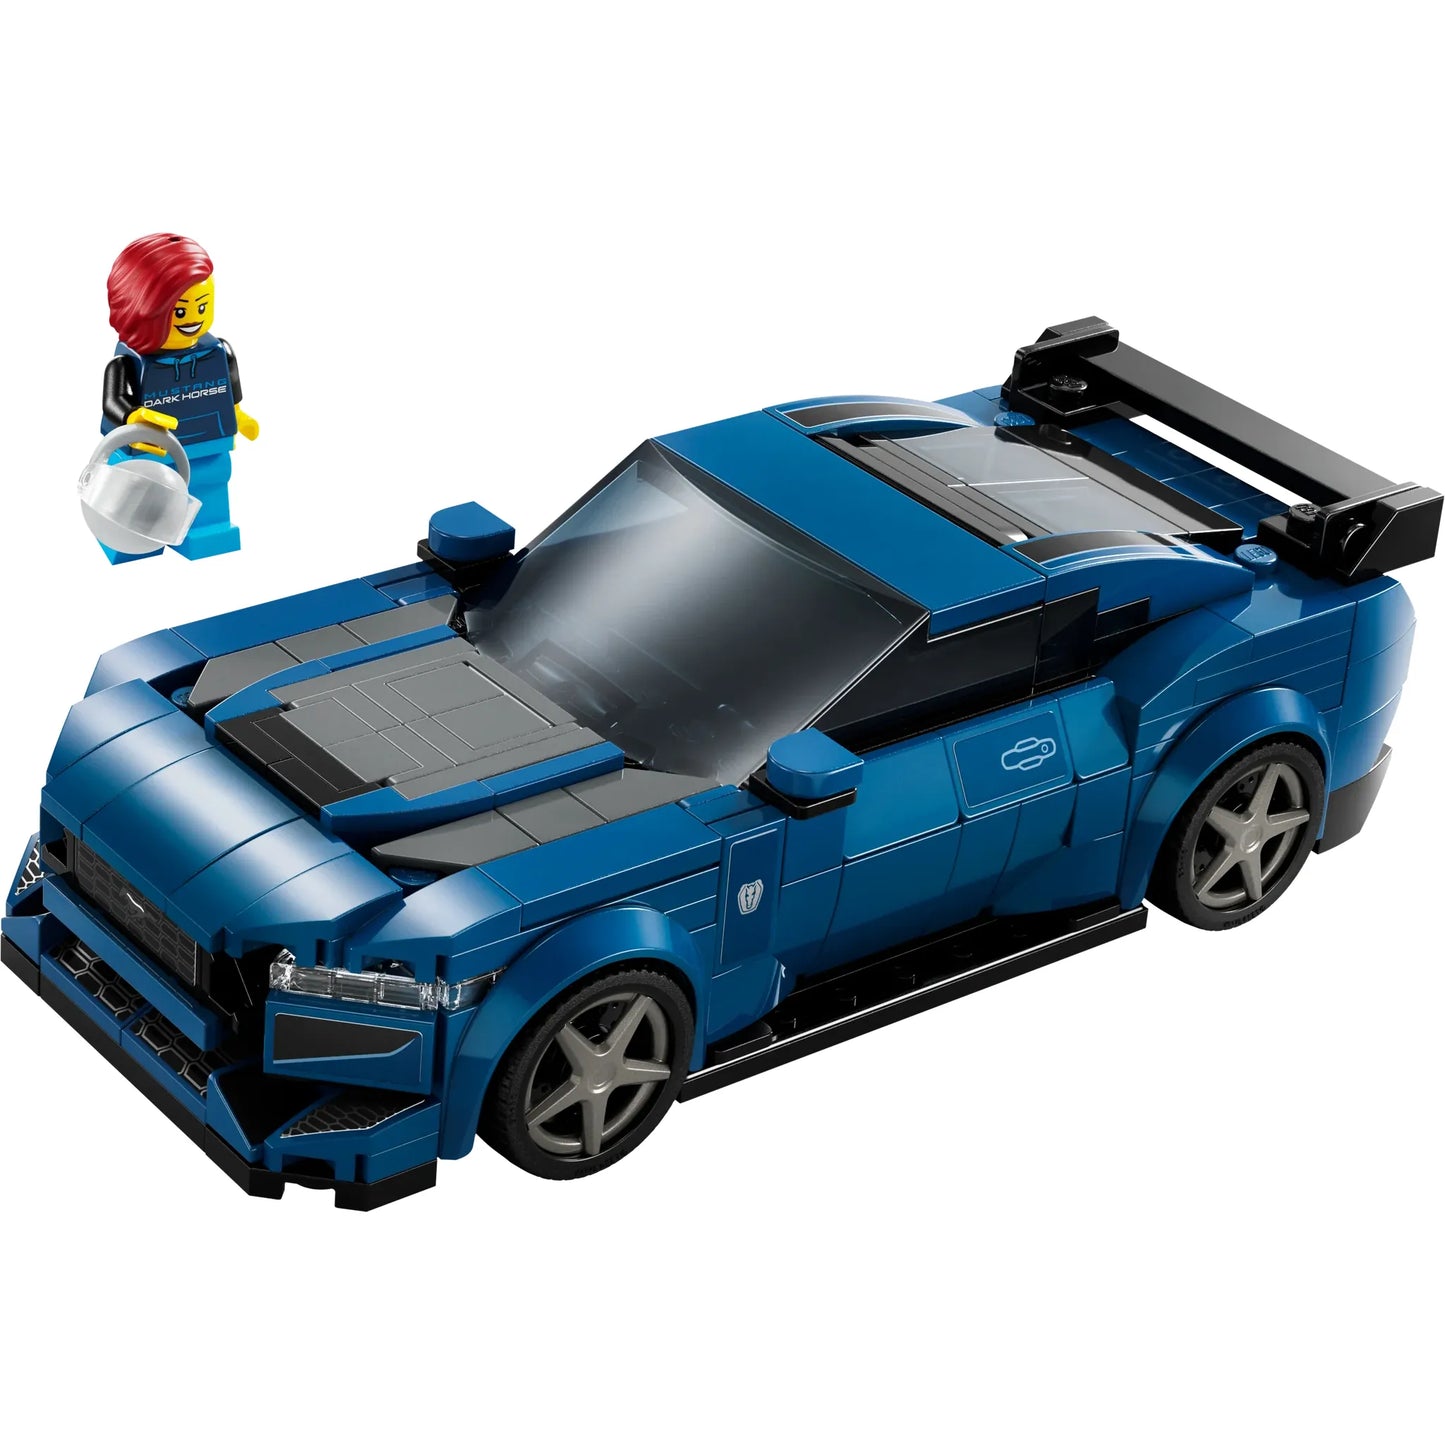 Speed Champions: Ford Mustang Dark Horse Sports Car Building Set